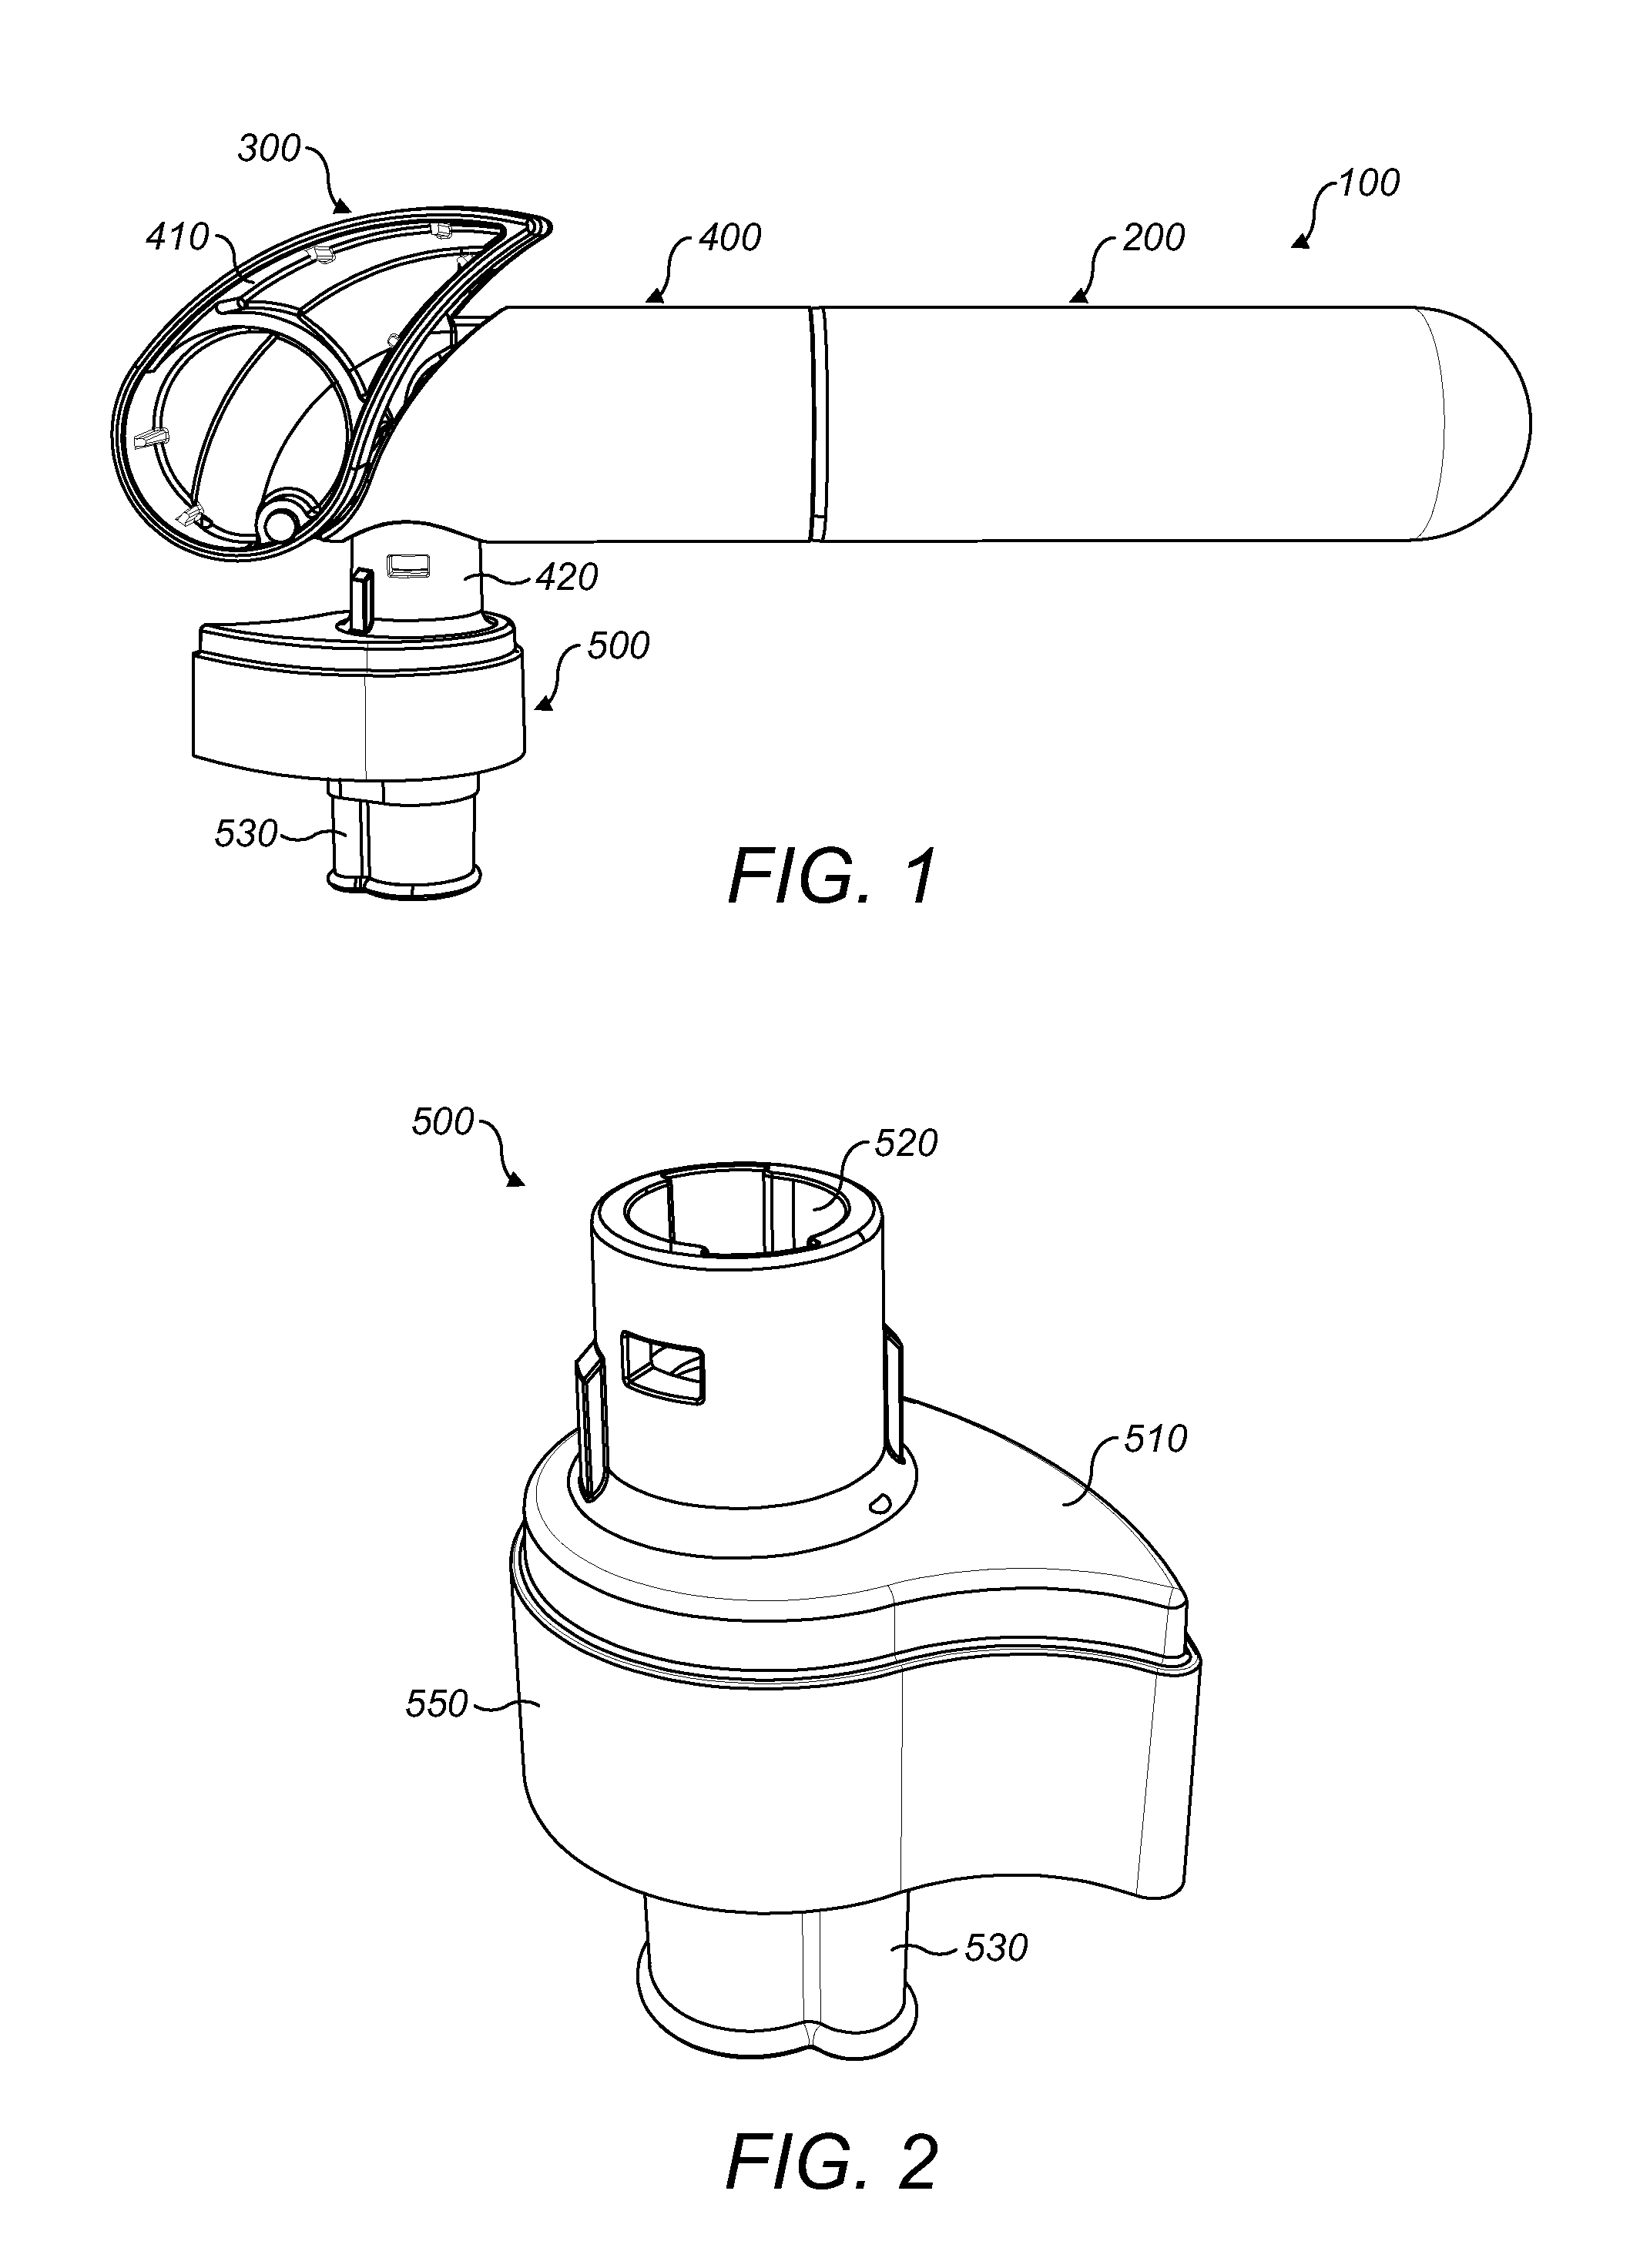 Carbonating device, method of use, and related discharge and cap assemblies